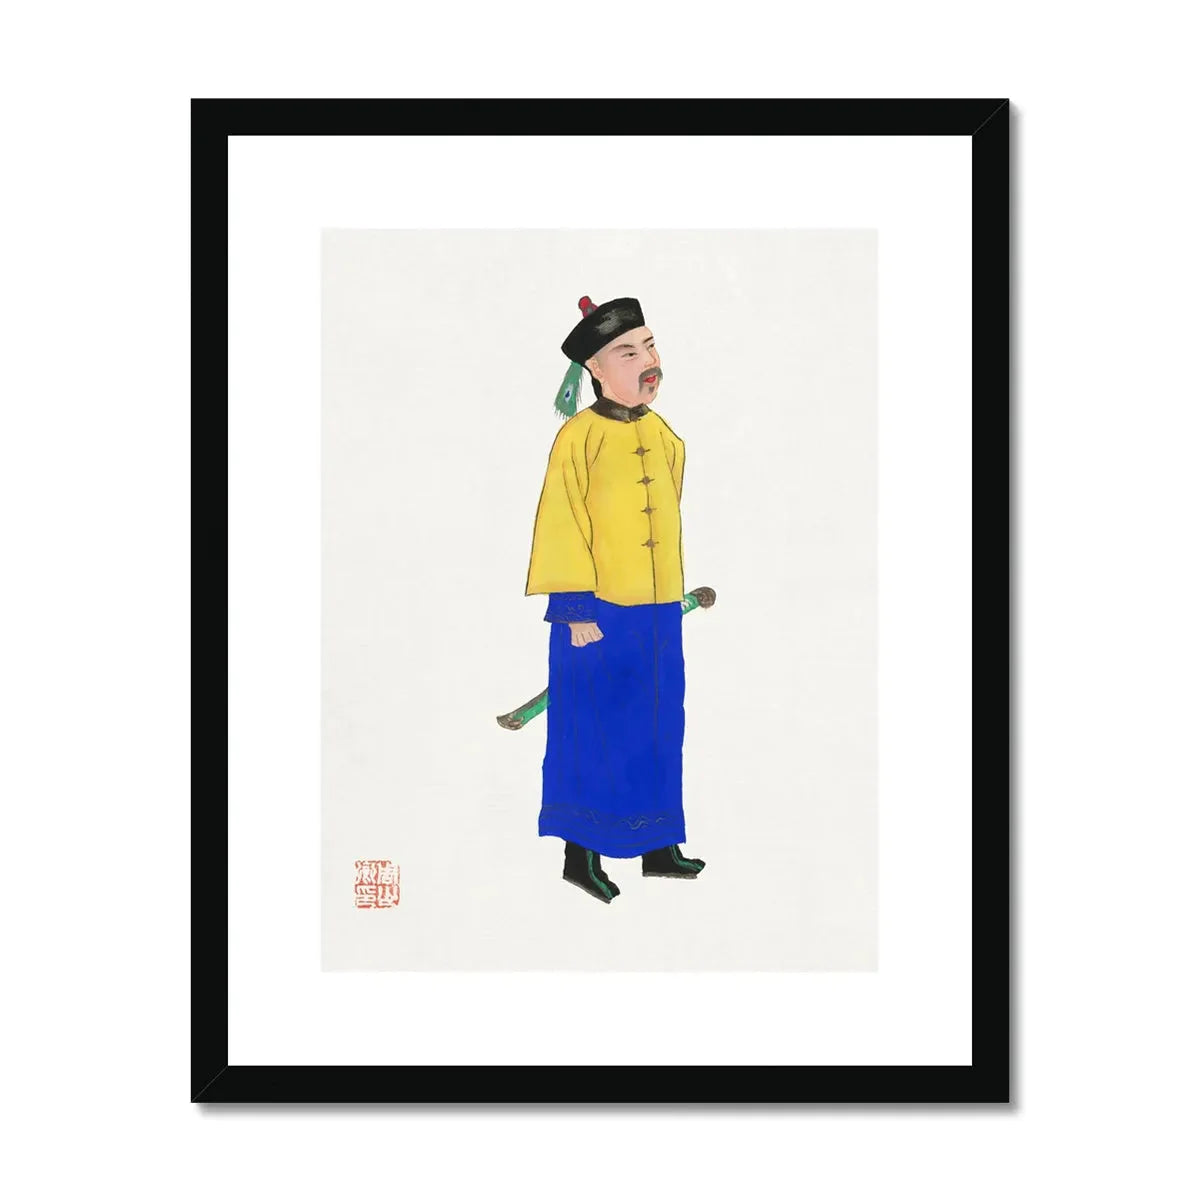 Chinese Military Man Framed & Mounted Print - 16’x20’ / Black Frame - Posters Prints & Visual Artwork - Aesthetic Art